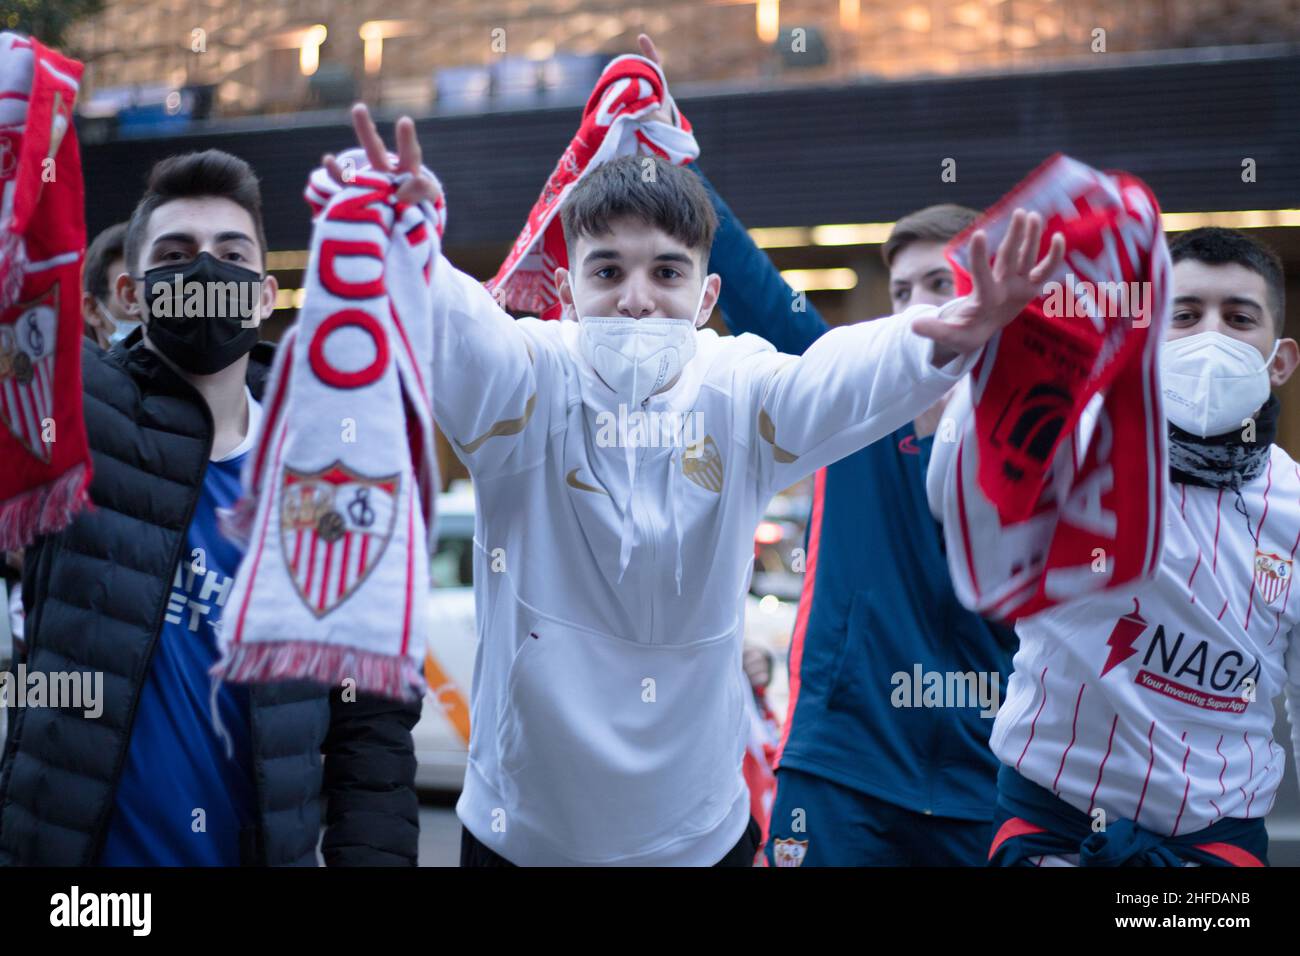 Seville, Spain. 15th Jan, 2022. Football supporters of Sevilla FC wearing fan gear seen outside the Sevilla FC hotel before the Copa del Rey football derby against Real Betis in Seville. (Photo credit: Mario Diaz Rasero Credit: Gonzales Photo/Alamy Live News Stock Photo